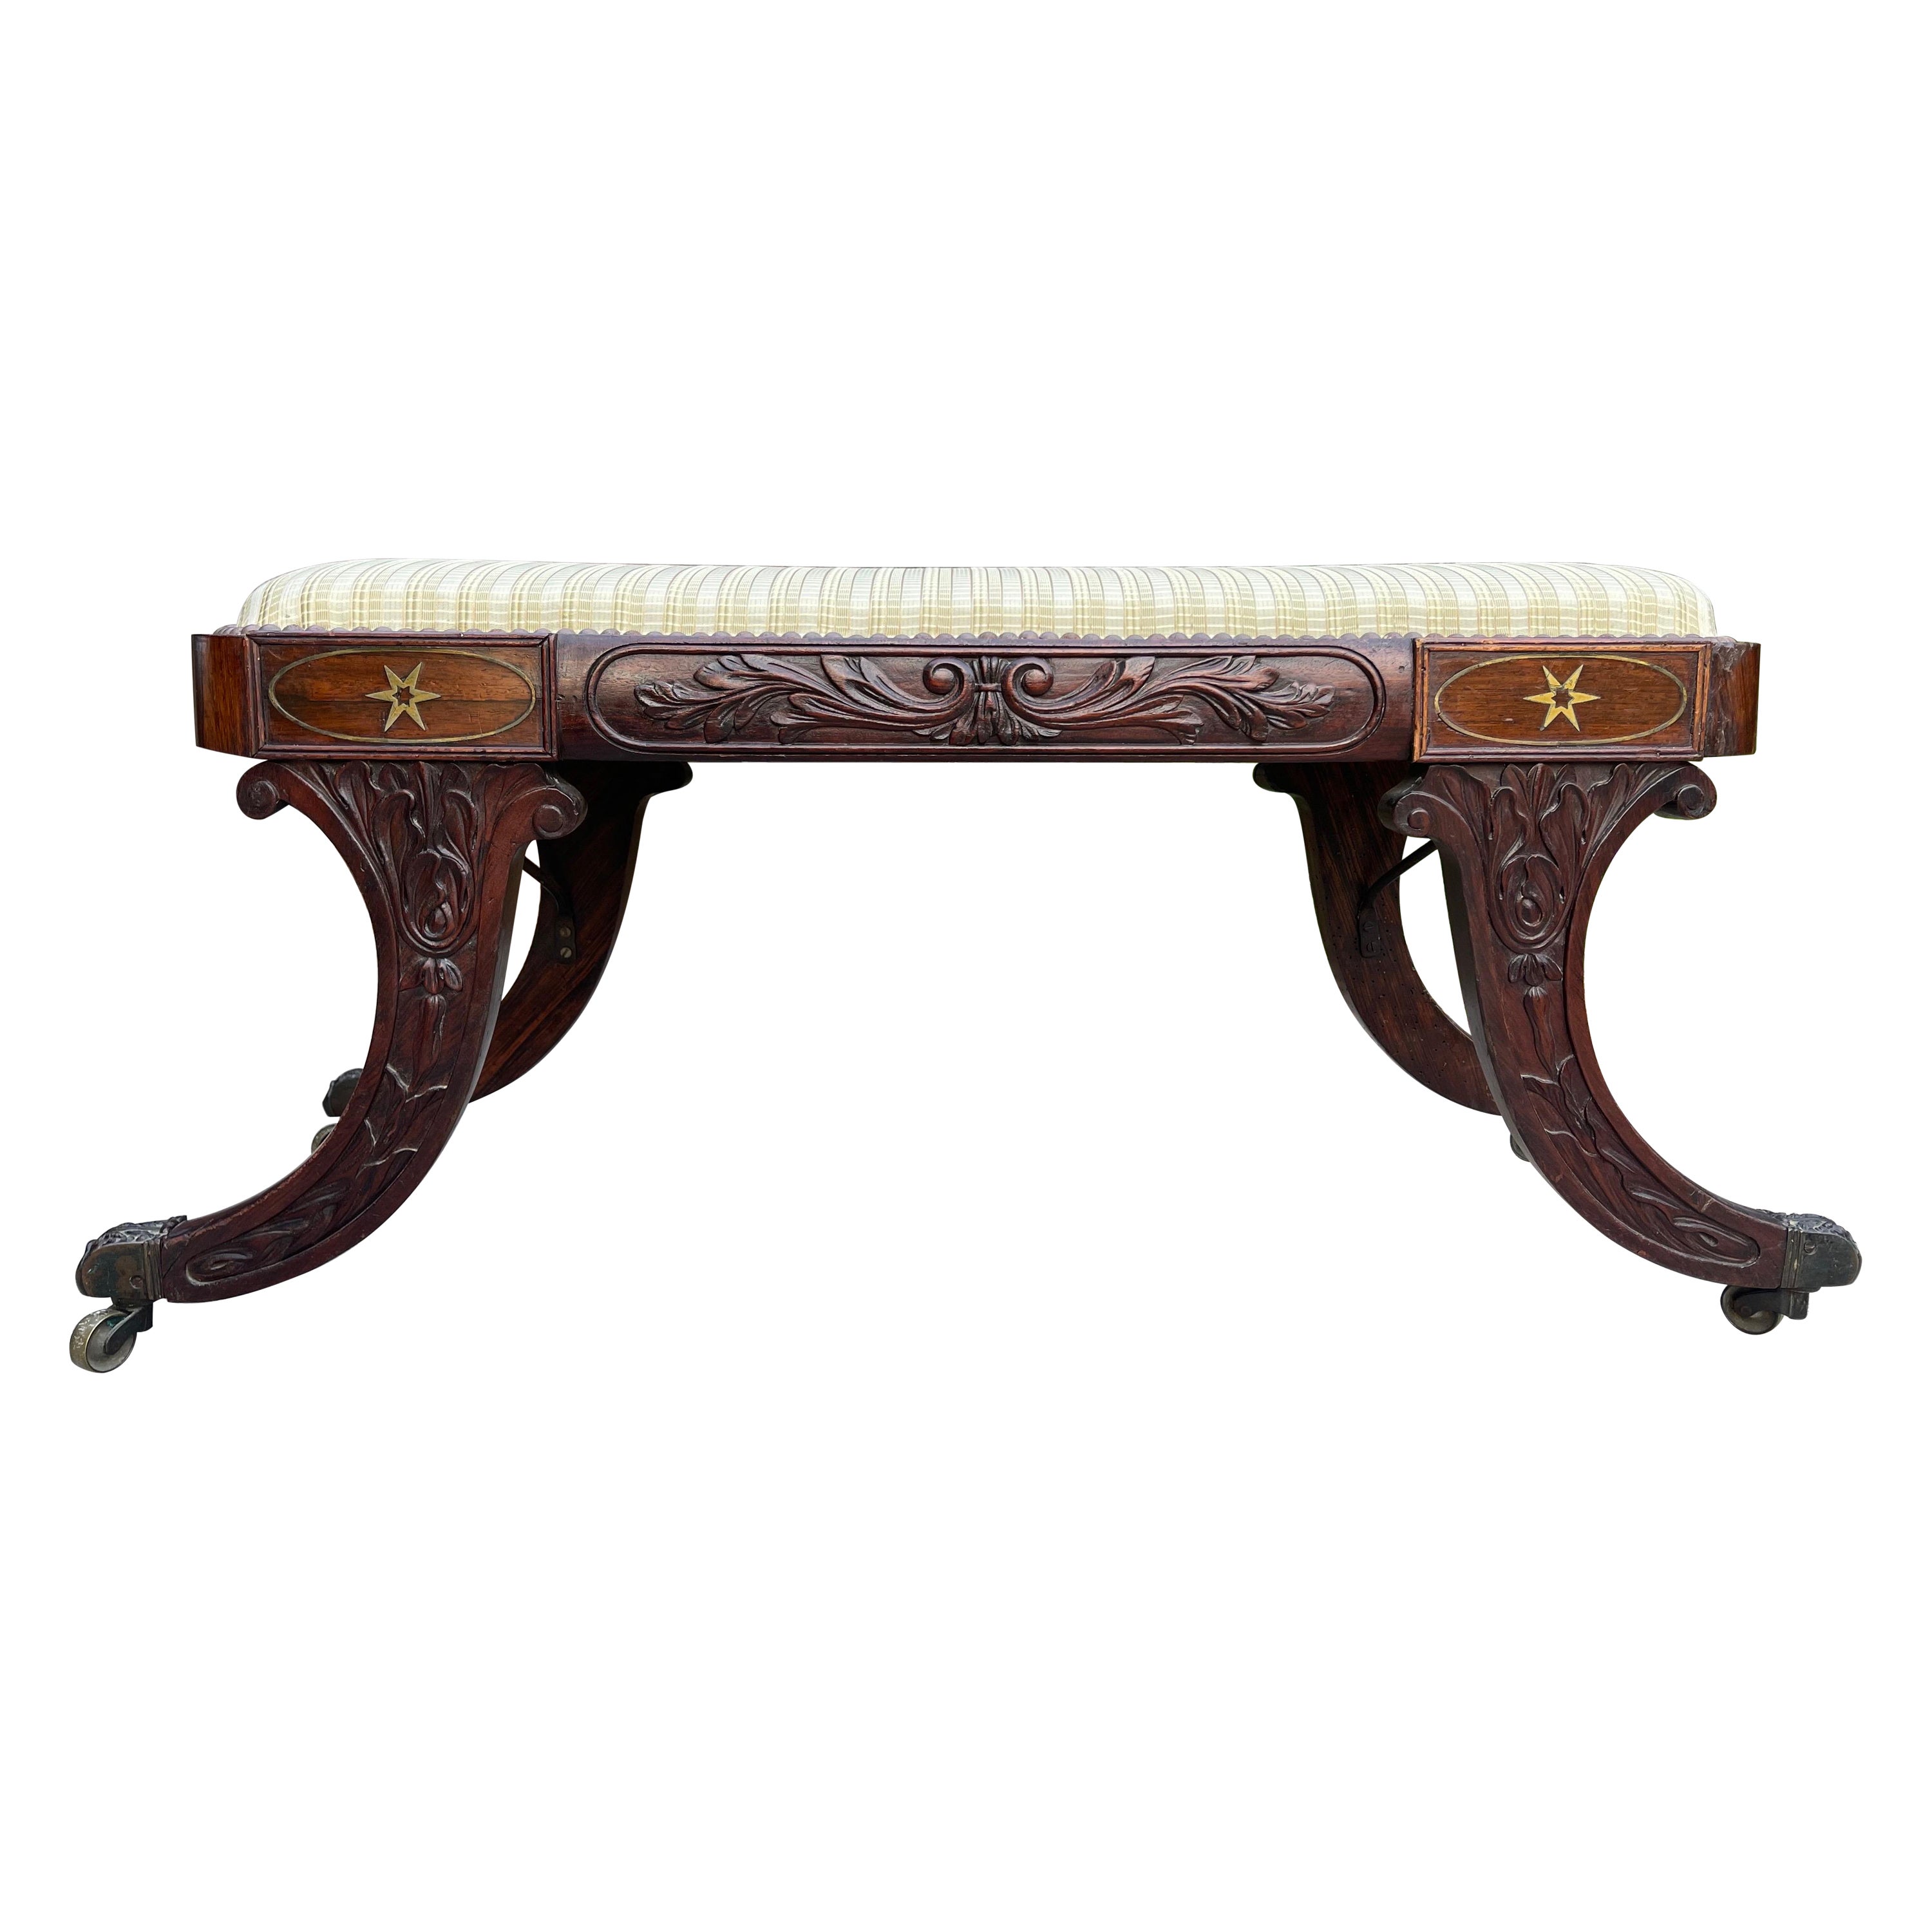 19th C. American Empire Carved Rosewood Bench on Casters, Duncan Phyfe Style For Sale